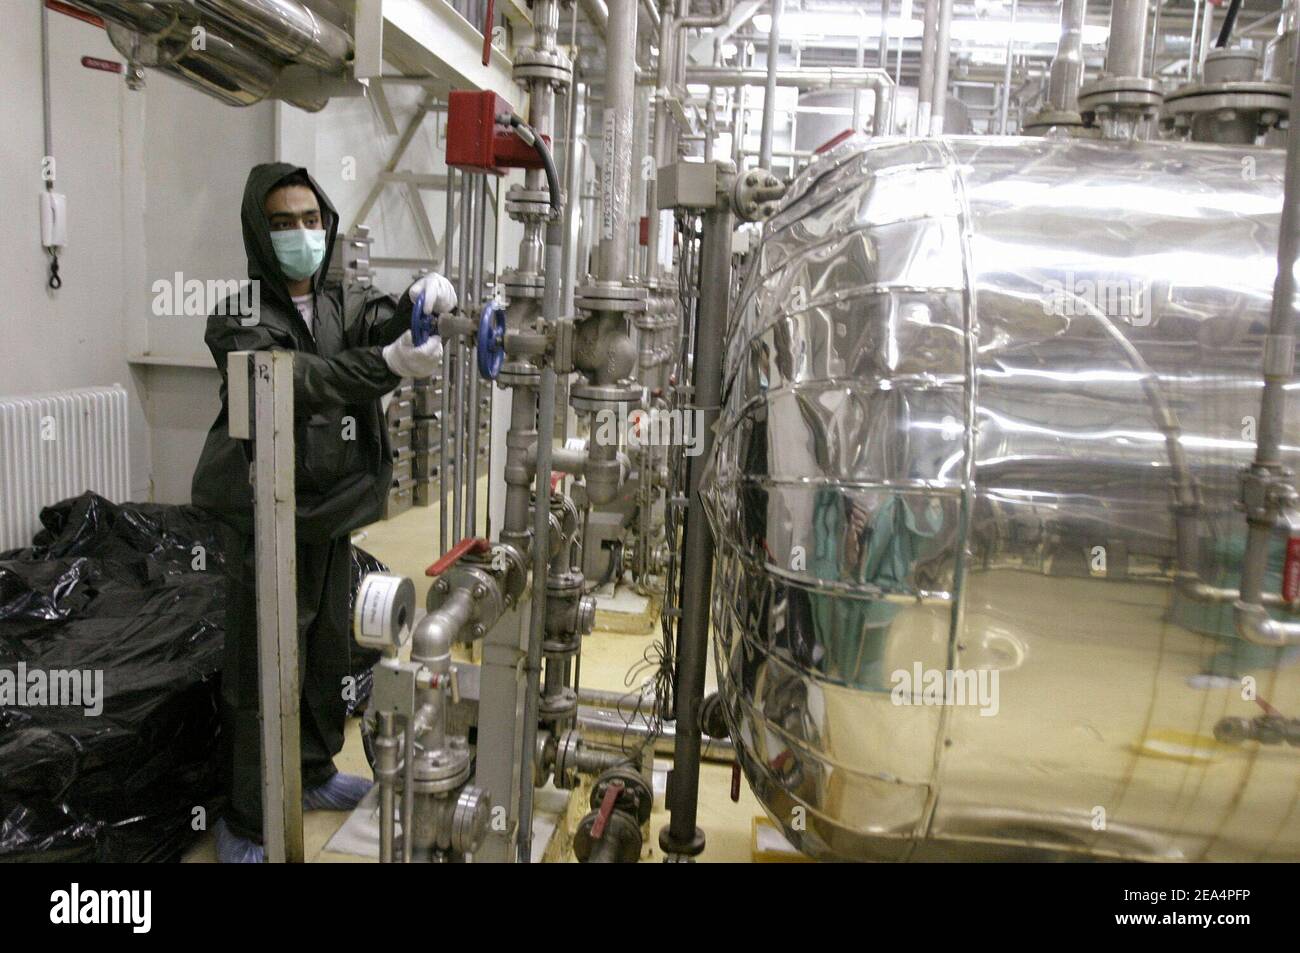 An Iranian technician works in the Uranium Conversion Facility (UCF) in Isfahan, Iran, on November 20, 2004. Iran said nuclear processing is set to resume at the Isfahan plant, the largest of its type in the country, on Wednesday. France, Britain and Germany have warned Iran of a major international crisis if the country goes ahead with its plans. Photo by ABACAPRESS.COM Stock Photo